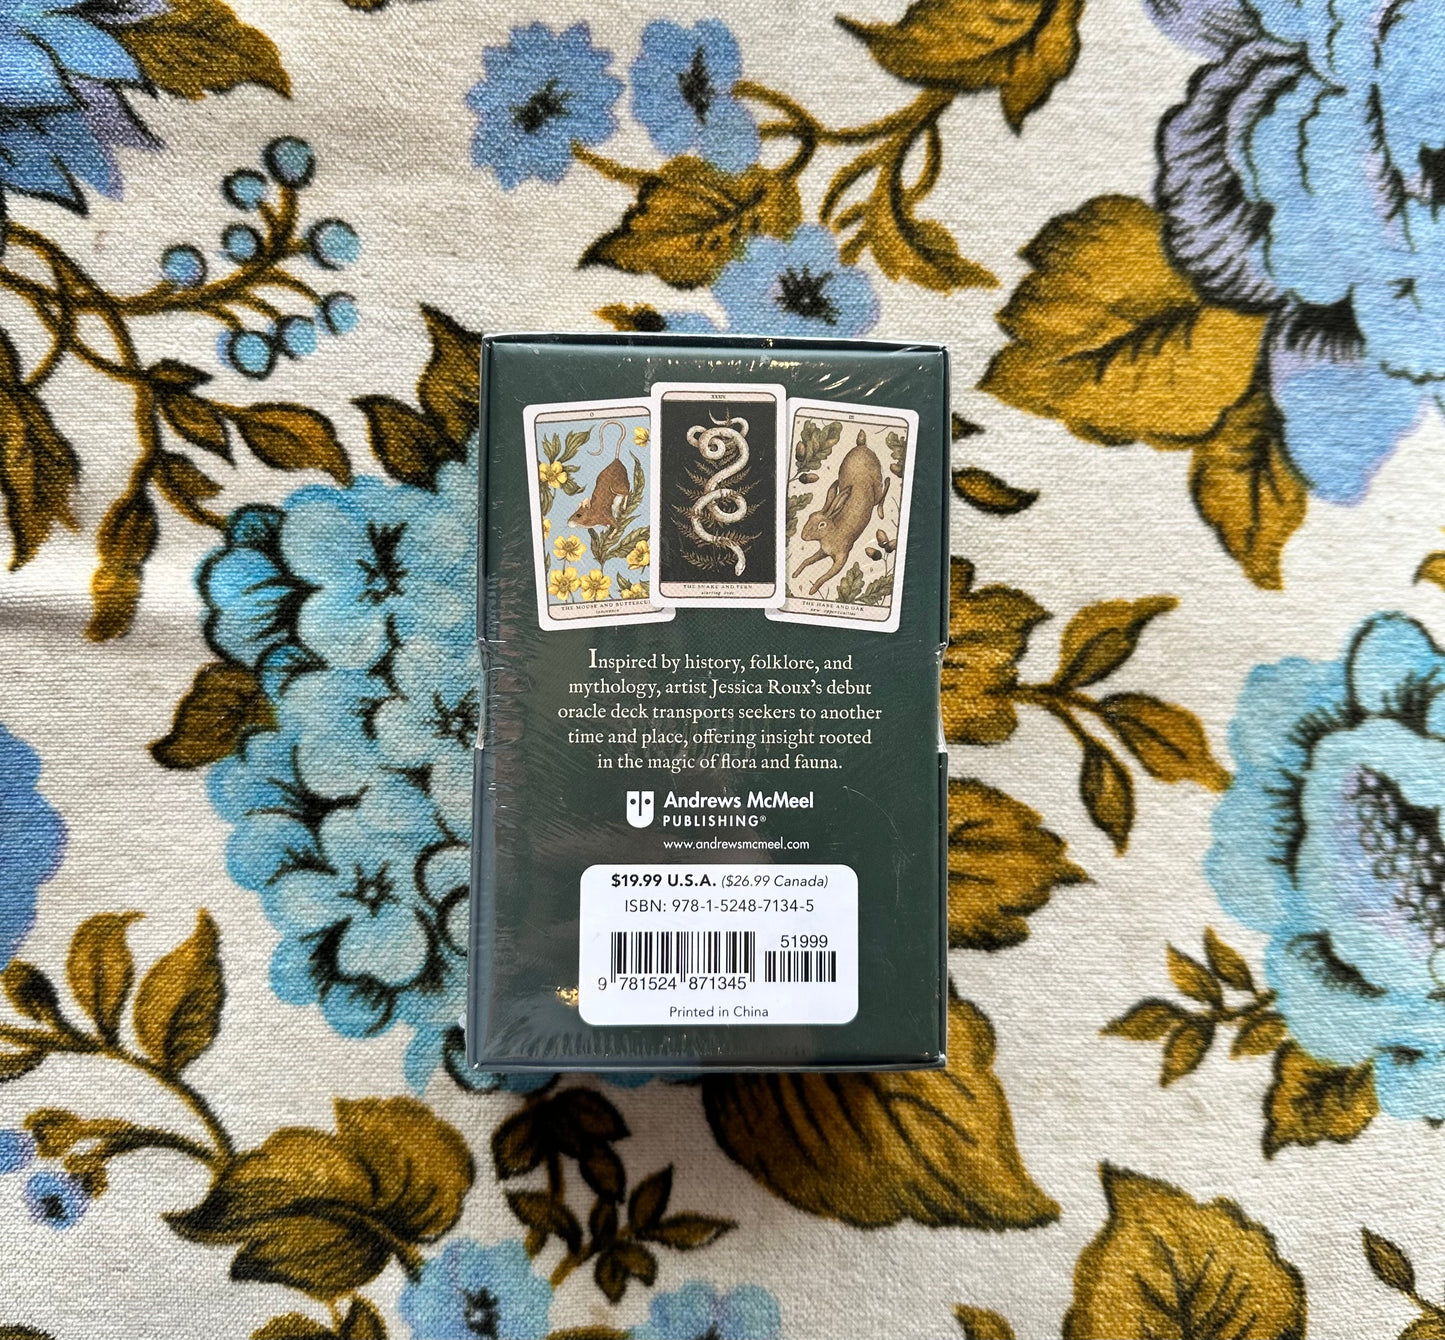 woodland wardens: a 52-card oracle deck & guidebook  from flower + furbish Shop now at flower + furbish